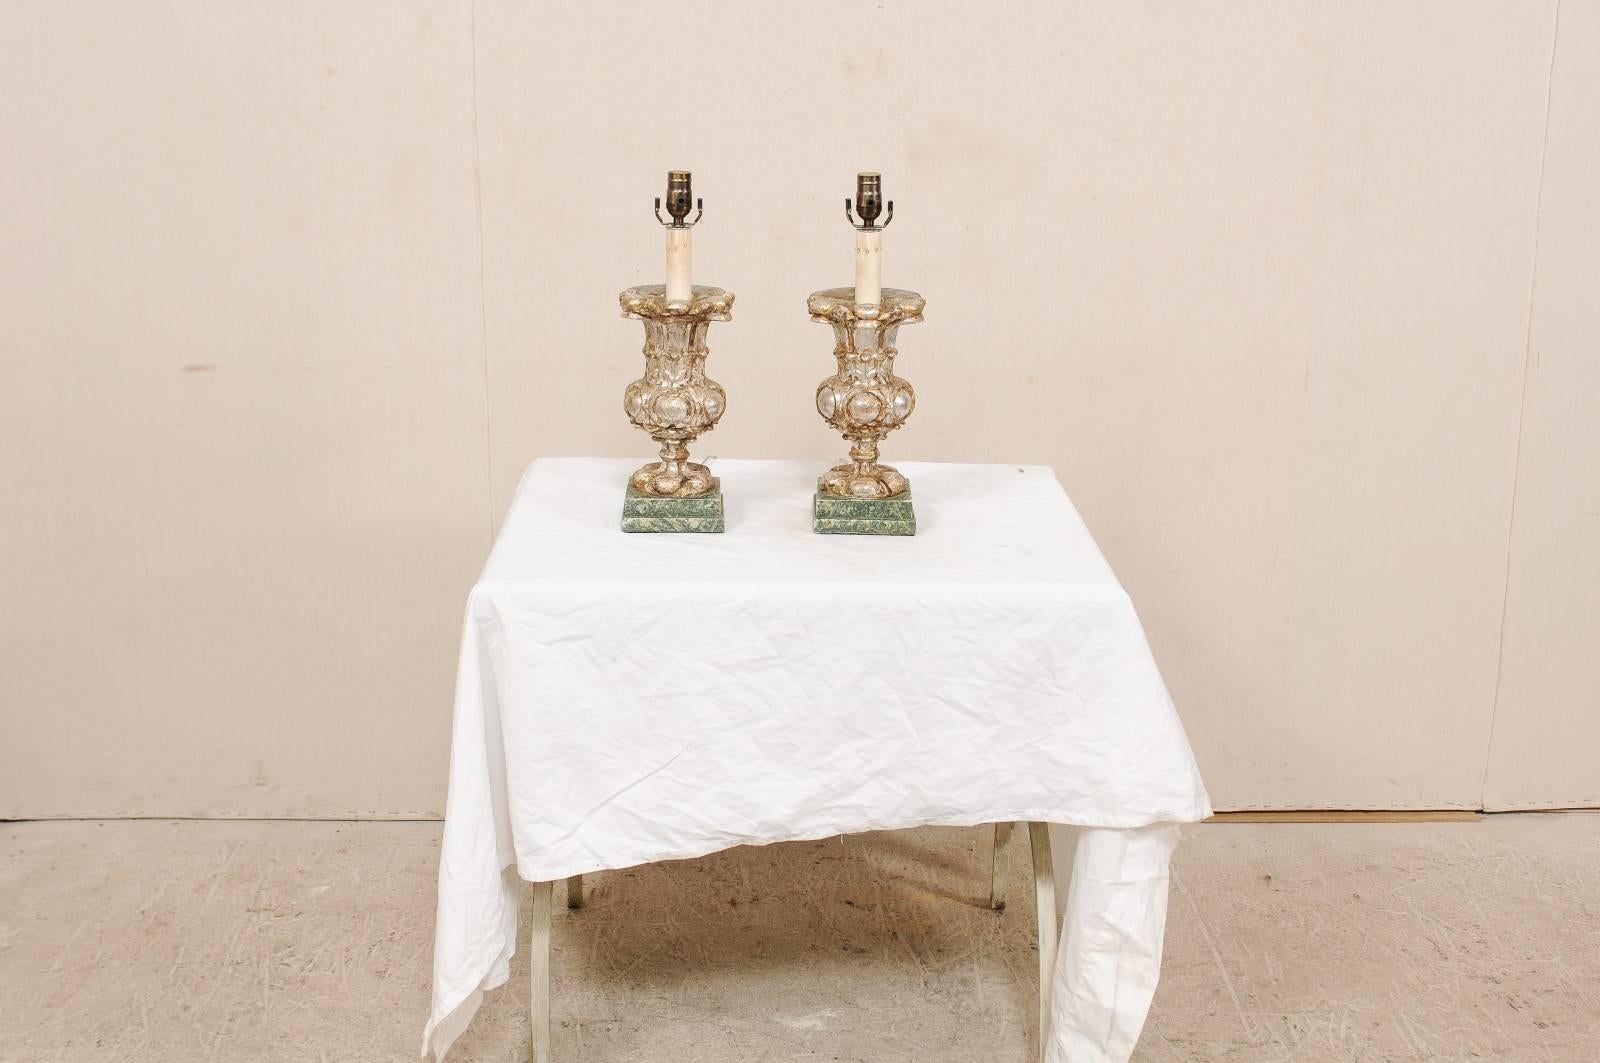 A pair of 19th century Italian table lamps. This pair of antique Italian carved wood table lamps feature urn shaped bodies raised upon a squared base. The urn bodies have hand-carved details about their fronts with leaf and convex circular motifs,